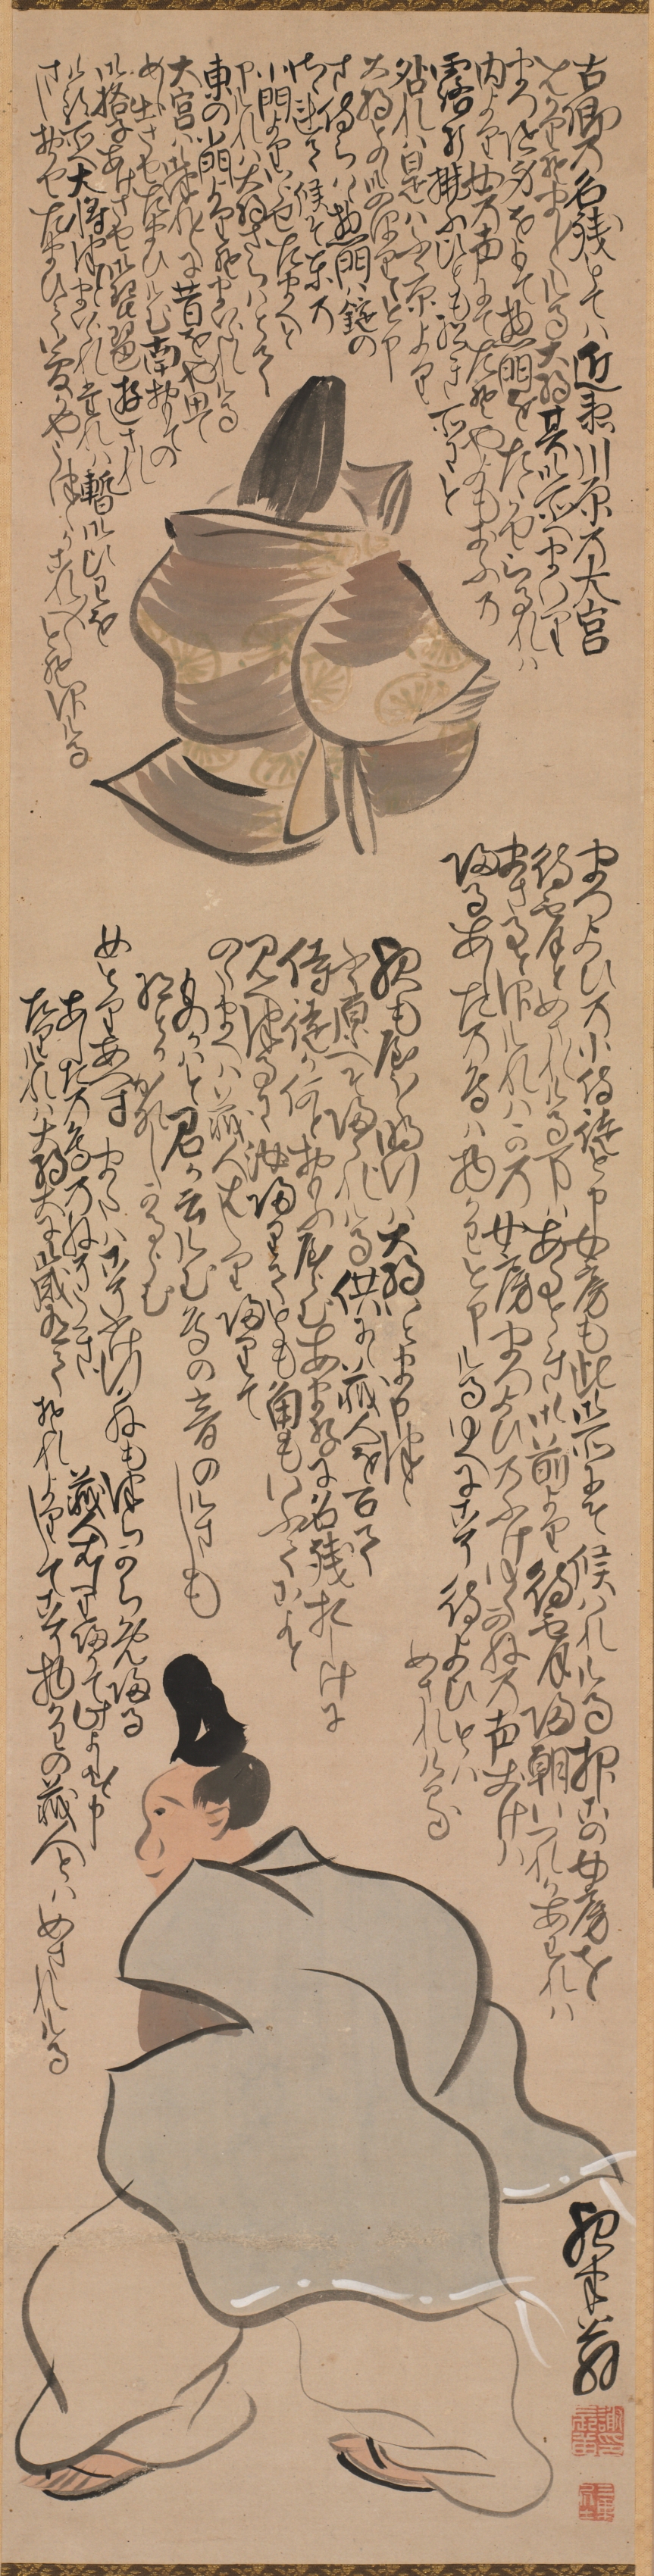 Figures with Calligraphy of a Passage from the "Heike Monogatari" ("The Tales of Heike")